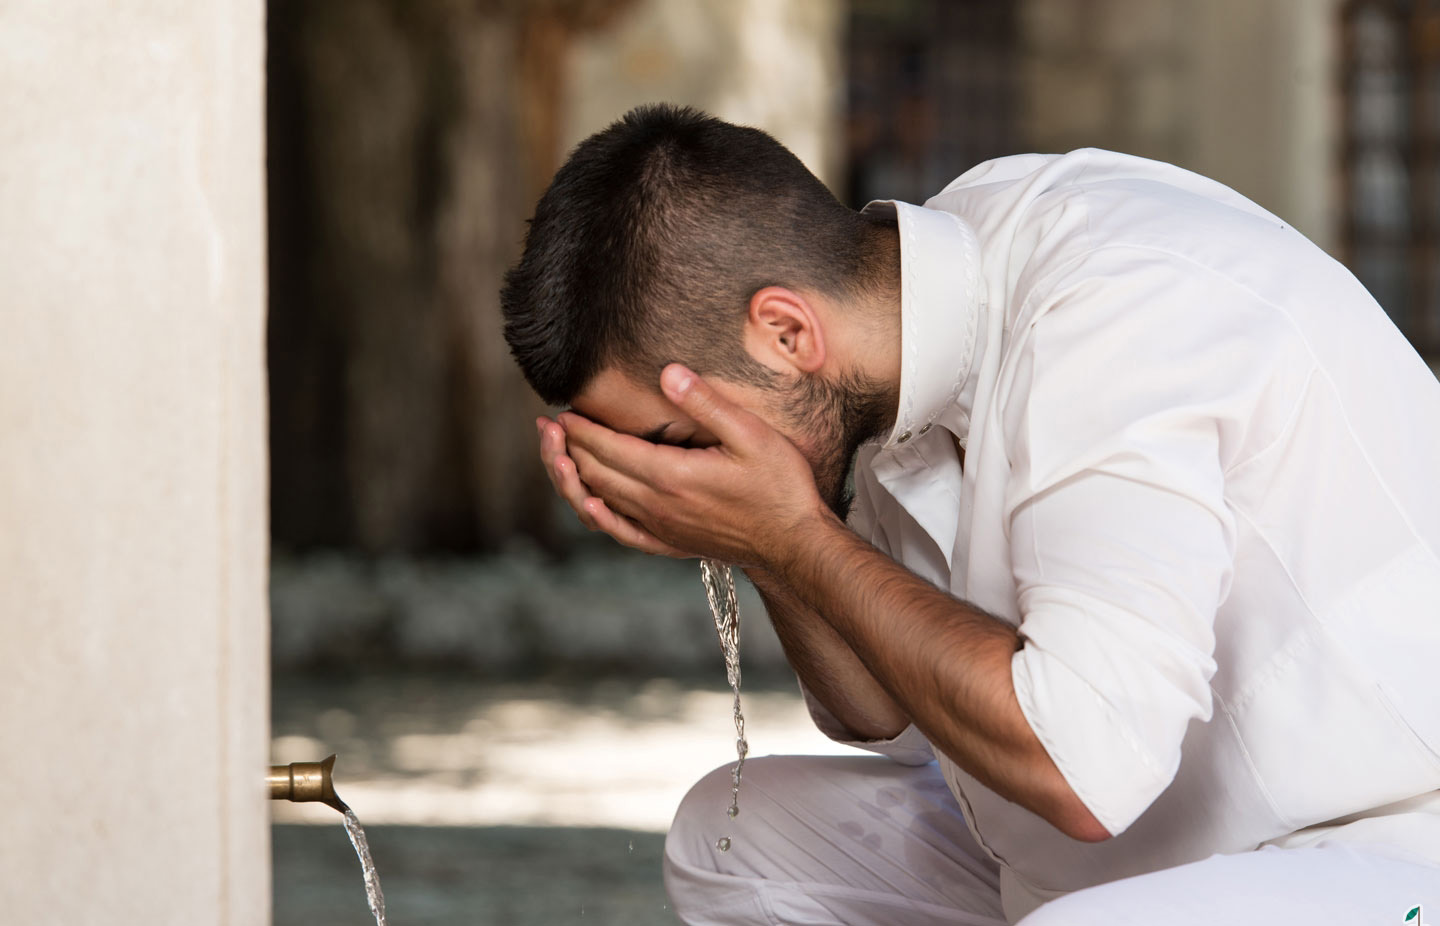 Could Men and Women Perform Ablution in Public